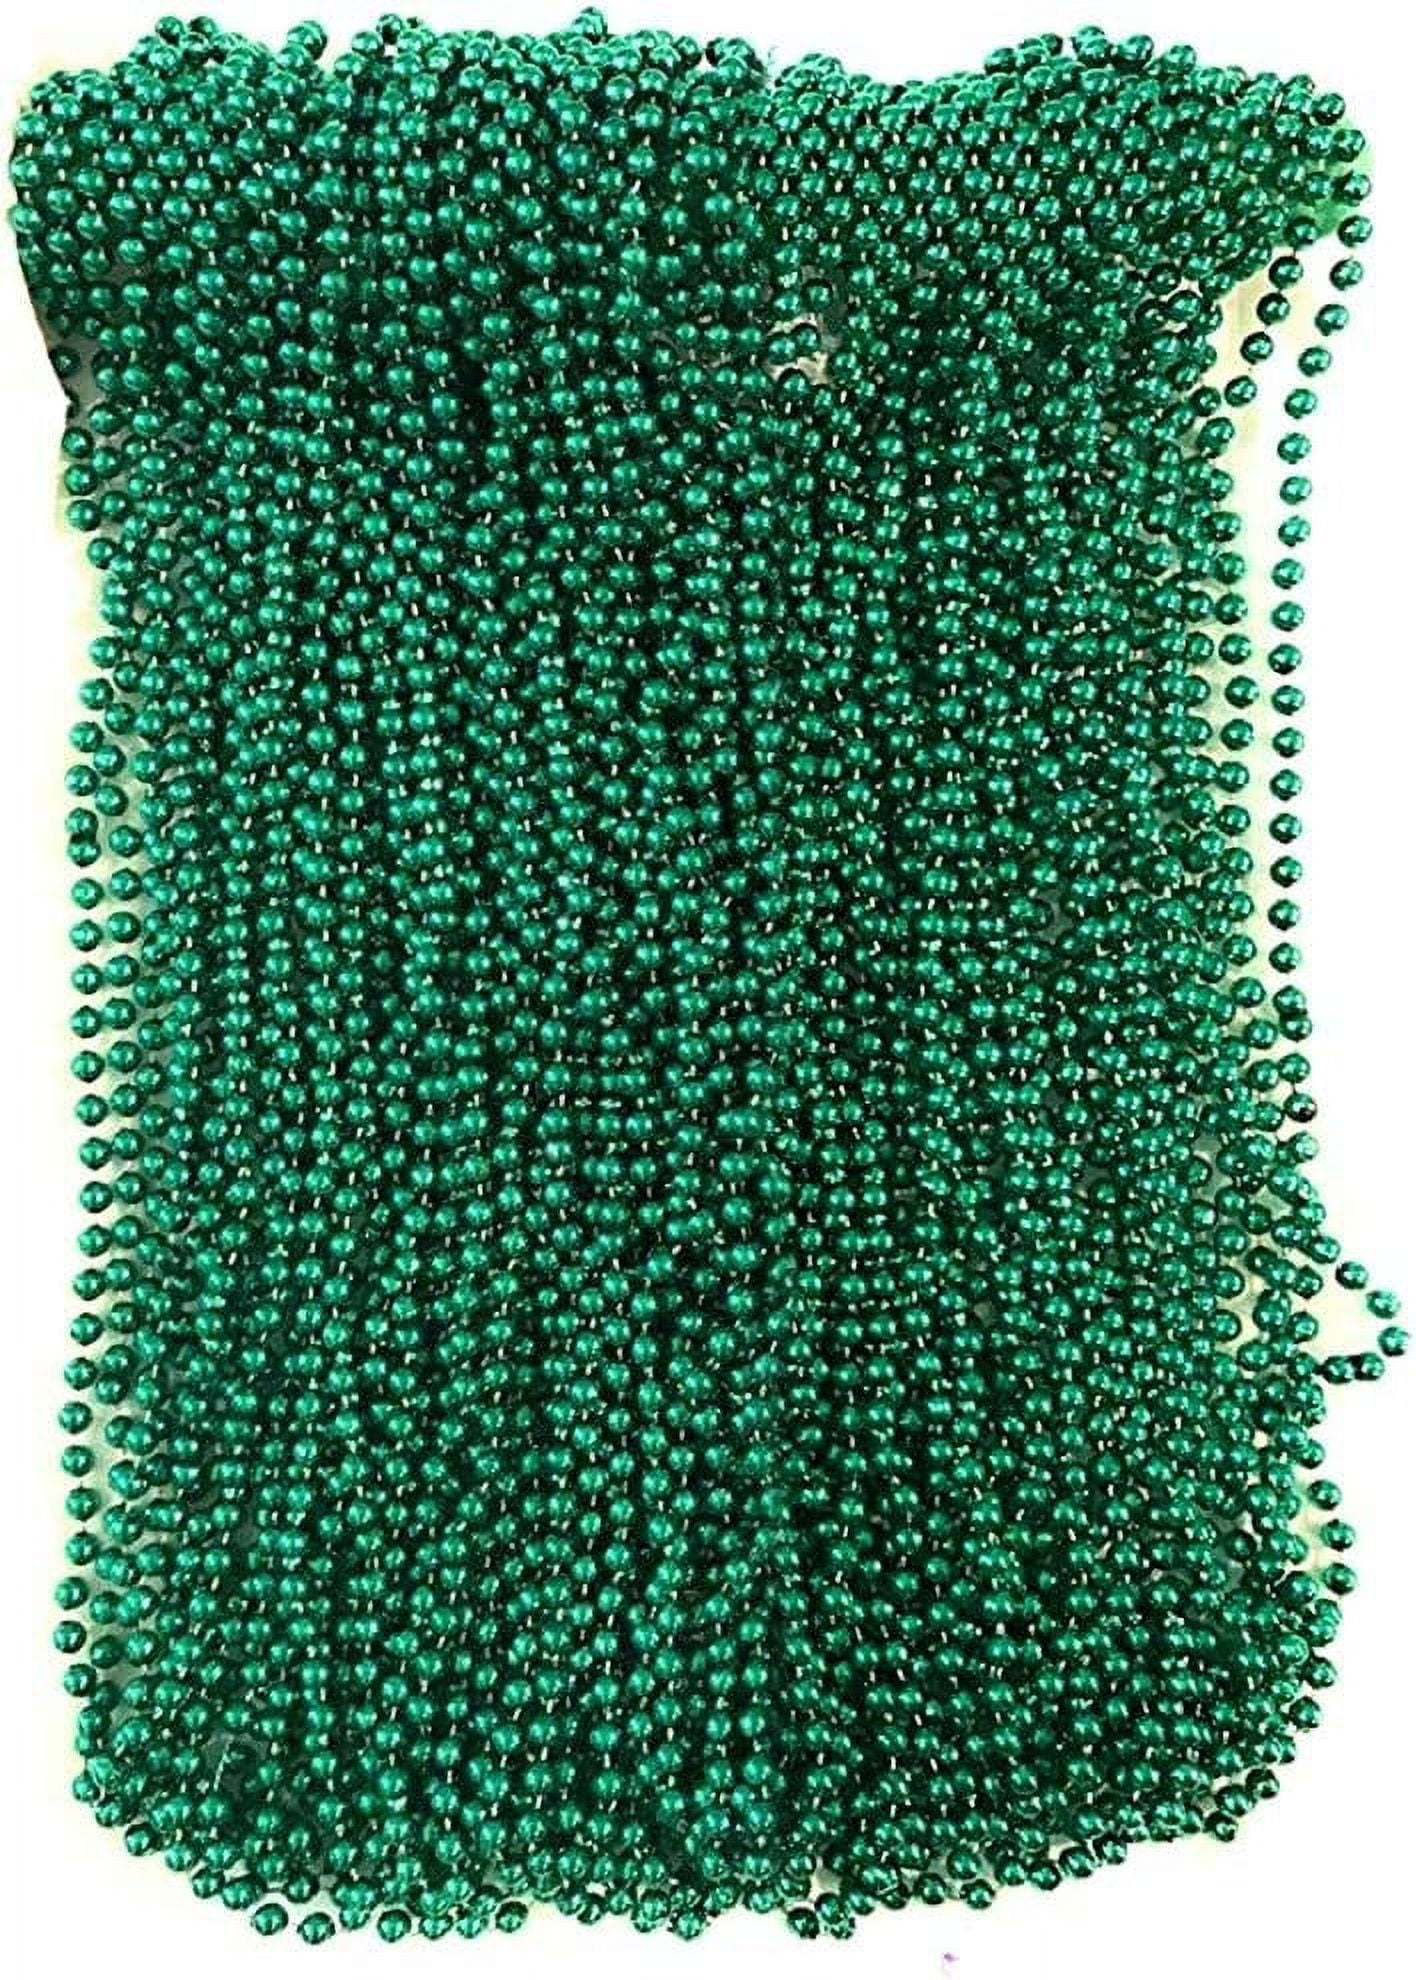 33 inch Mardi Gras Bead Necklaces - Pack of 12 (Green), Women's, Size: One size, Silver